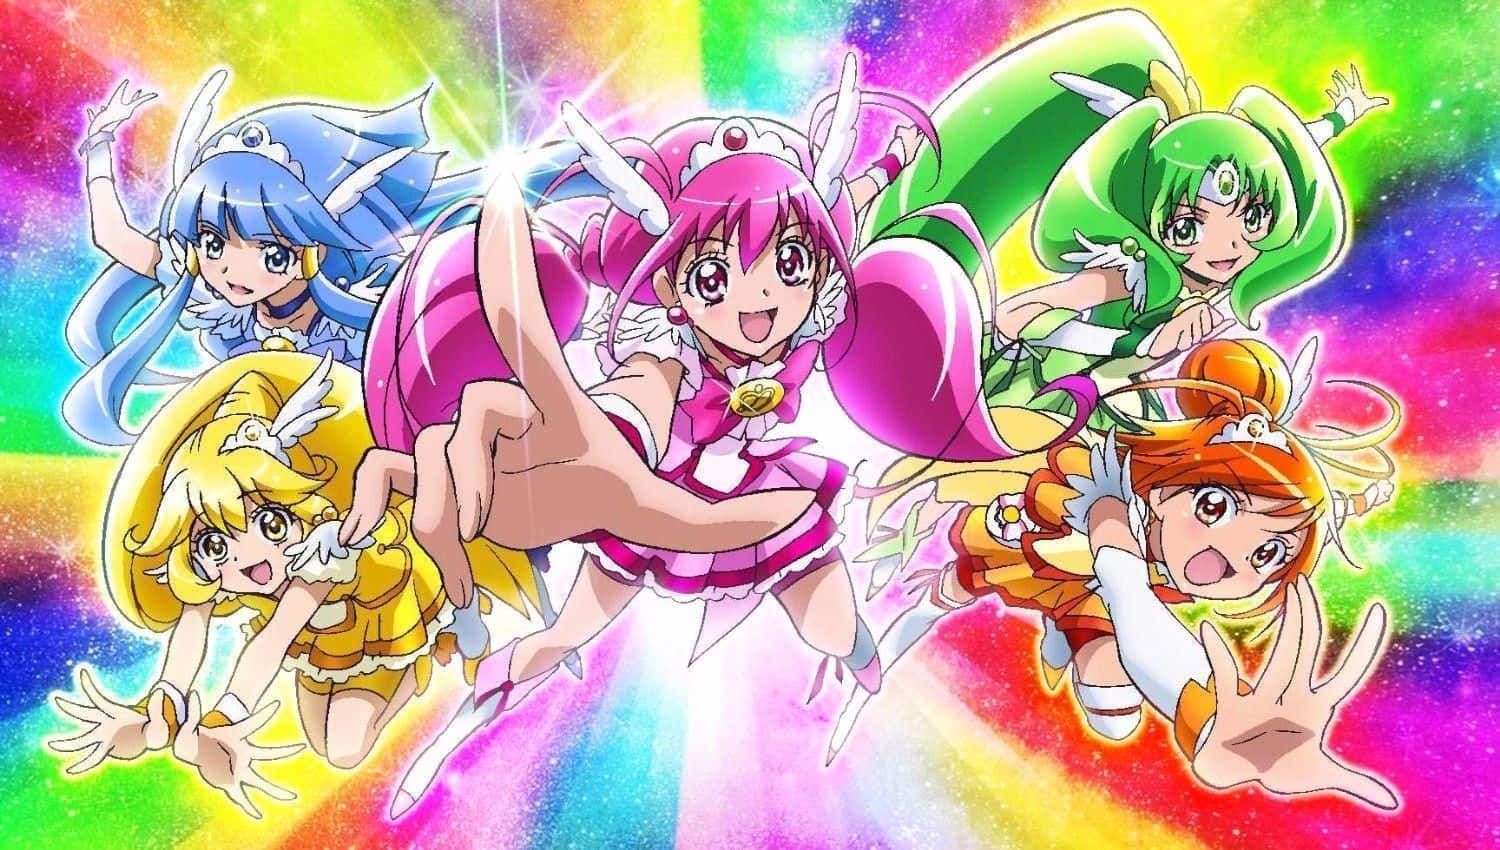 "The Glitter Force Combines their Powers to Defeat the Evil!" Wallpaper